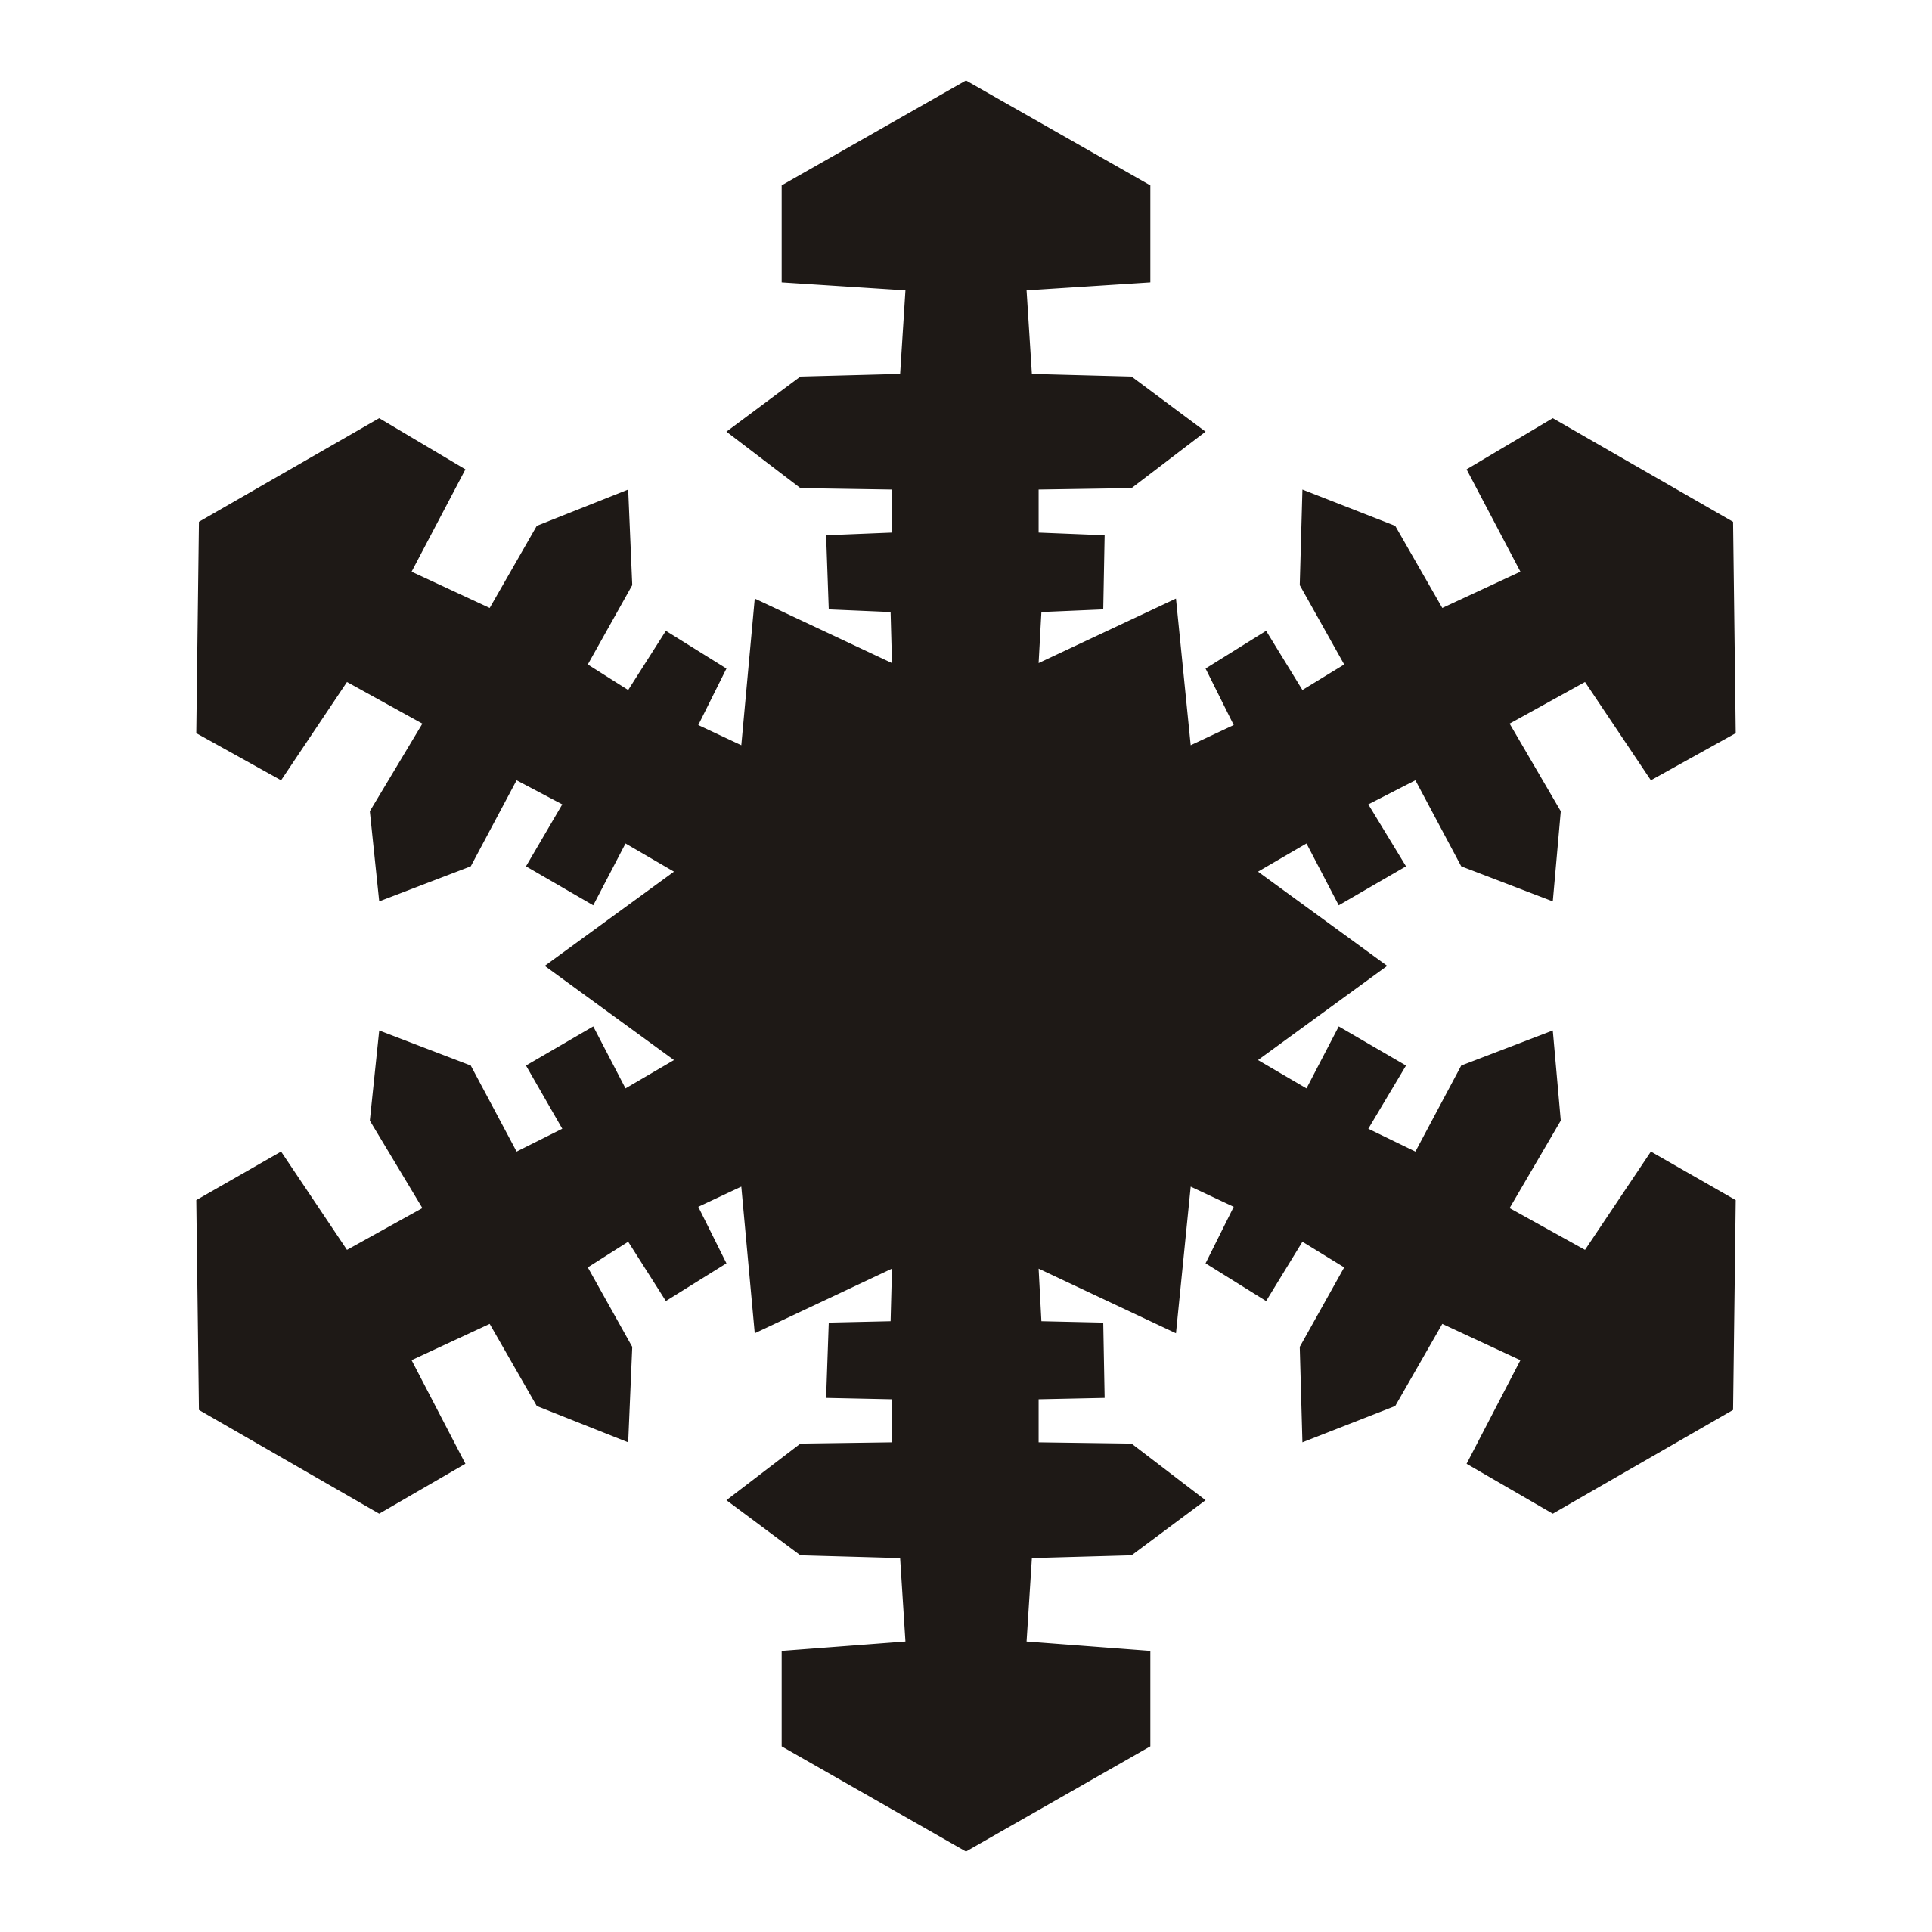 Free download best x. Clipart snowflake black and white